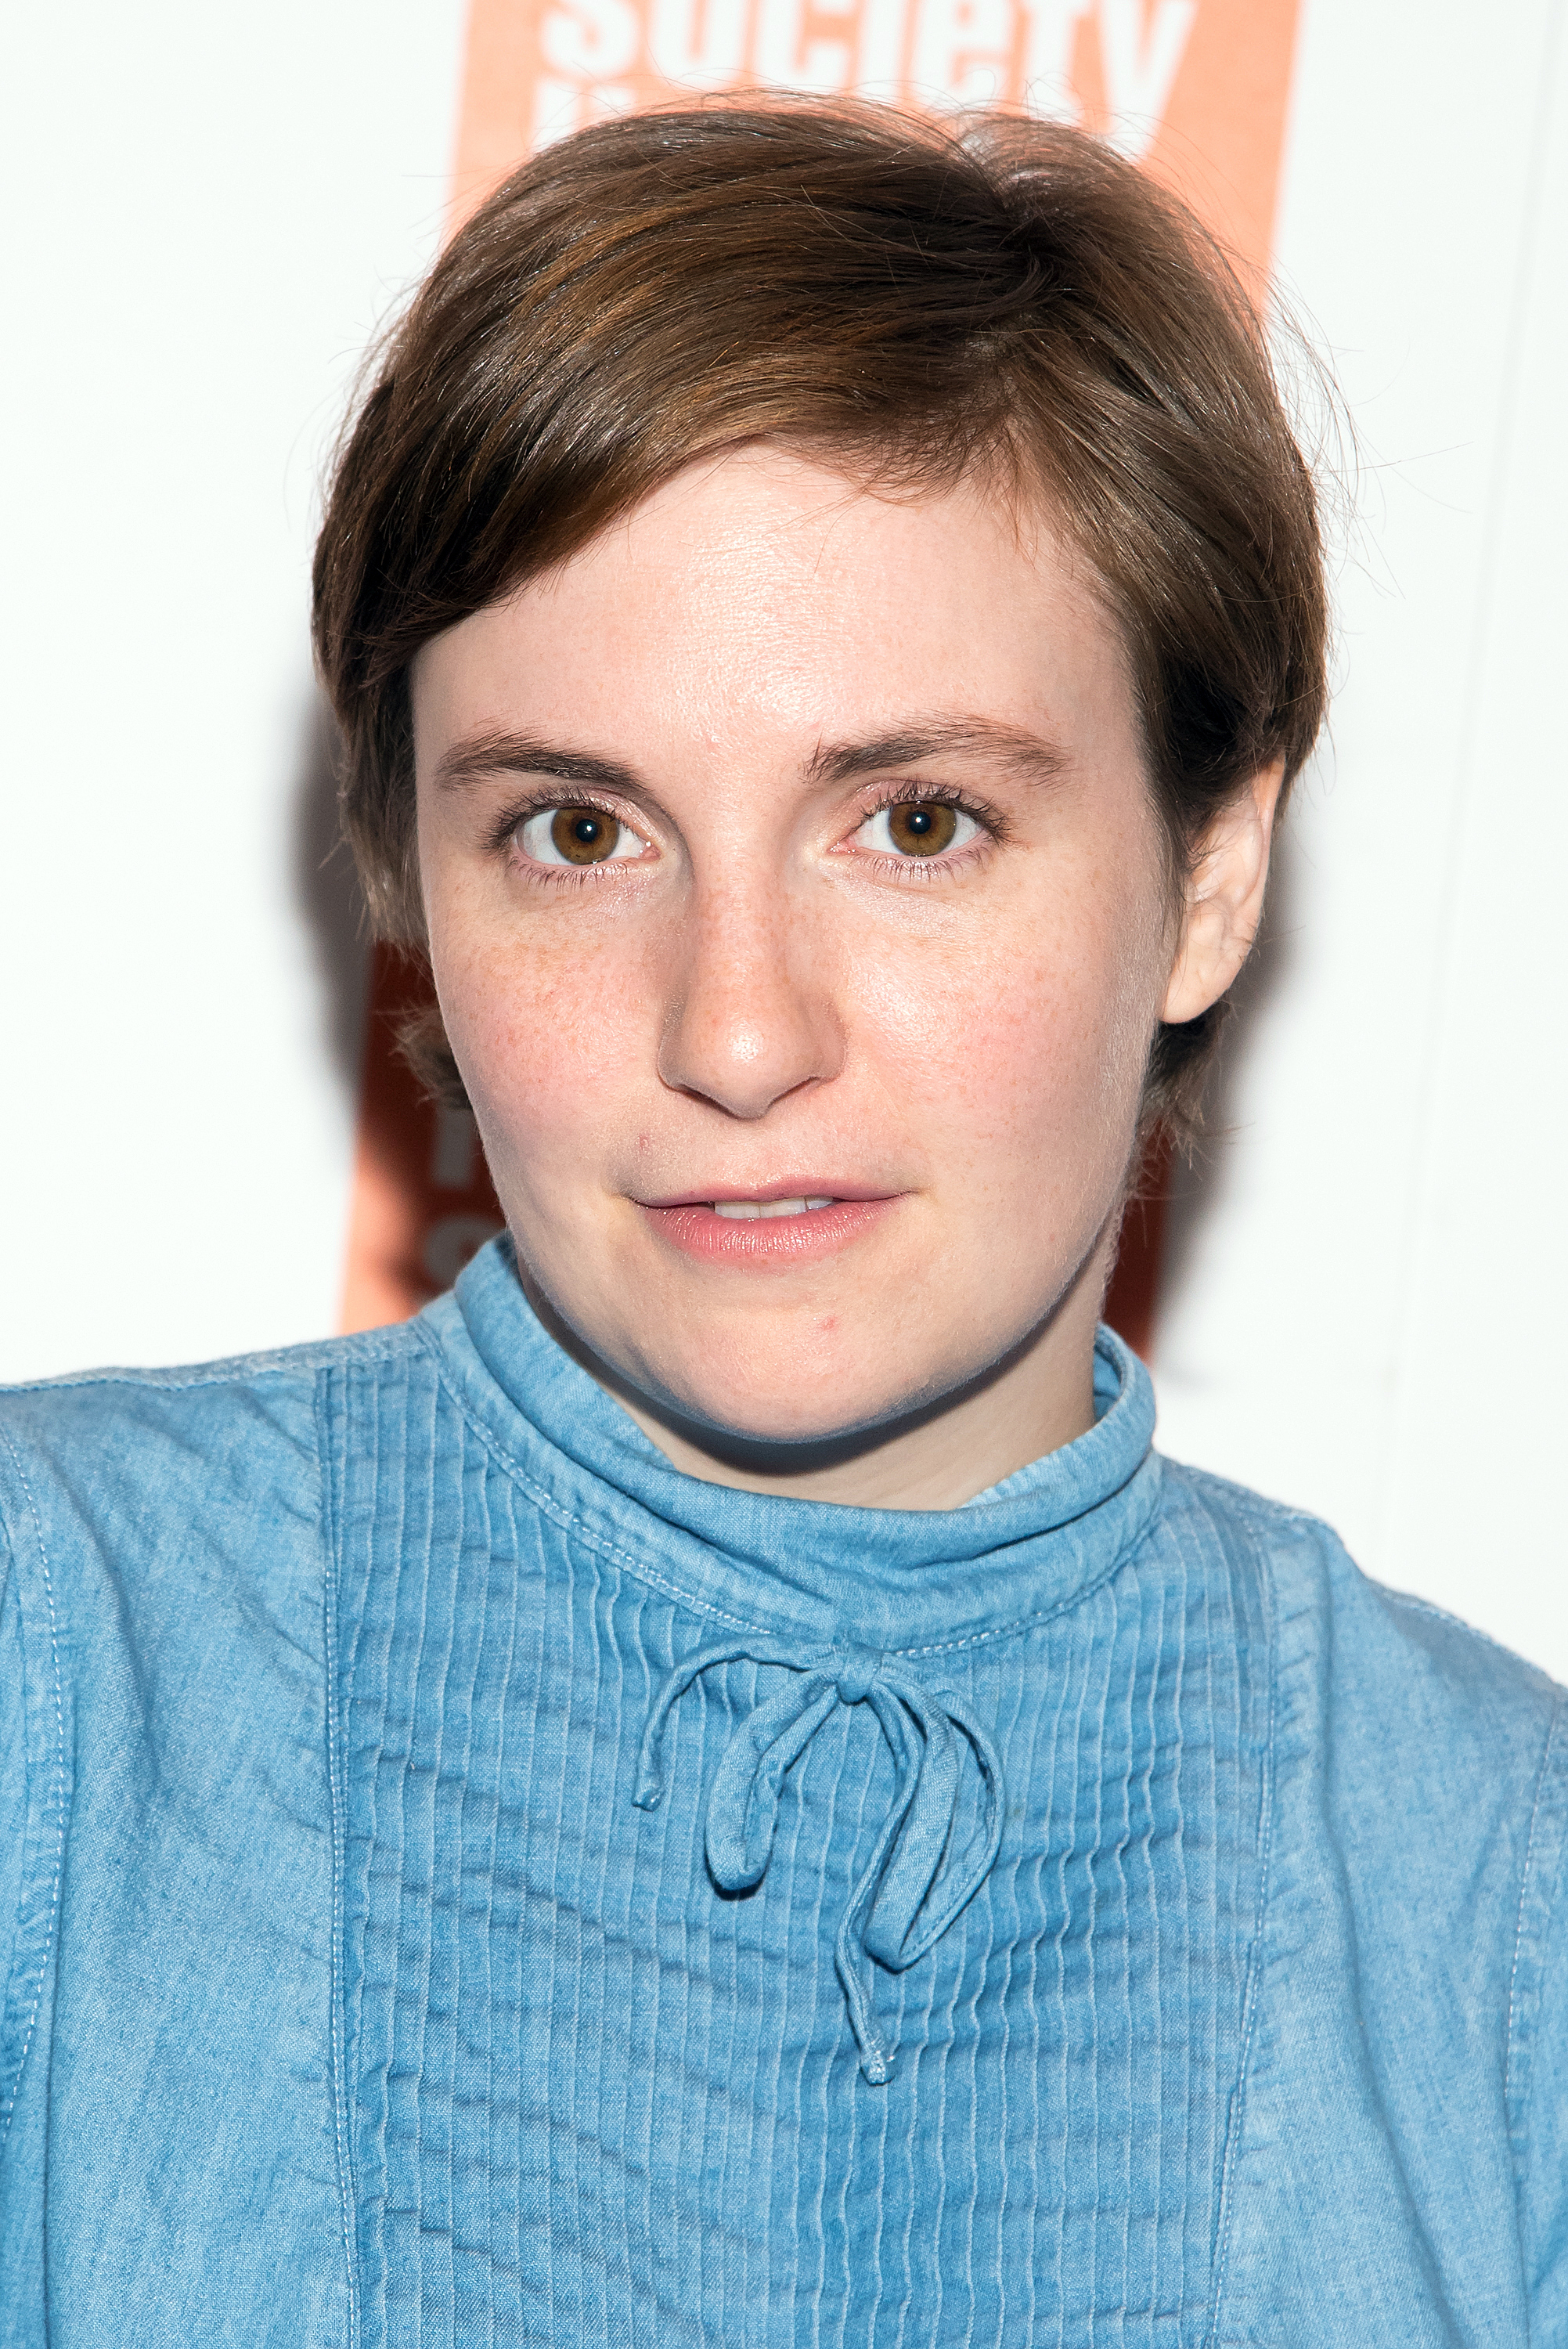 Lena Dunham attends the 2015 Film Society of Lincoln Center Summer Talks with Judd Apatow and Lena Dunham at Walter Reade Theater in New York City on July 13, 2015. (Mike Pont—WireImage)